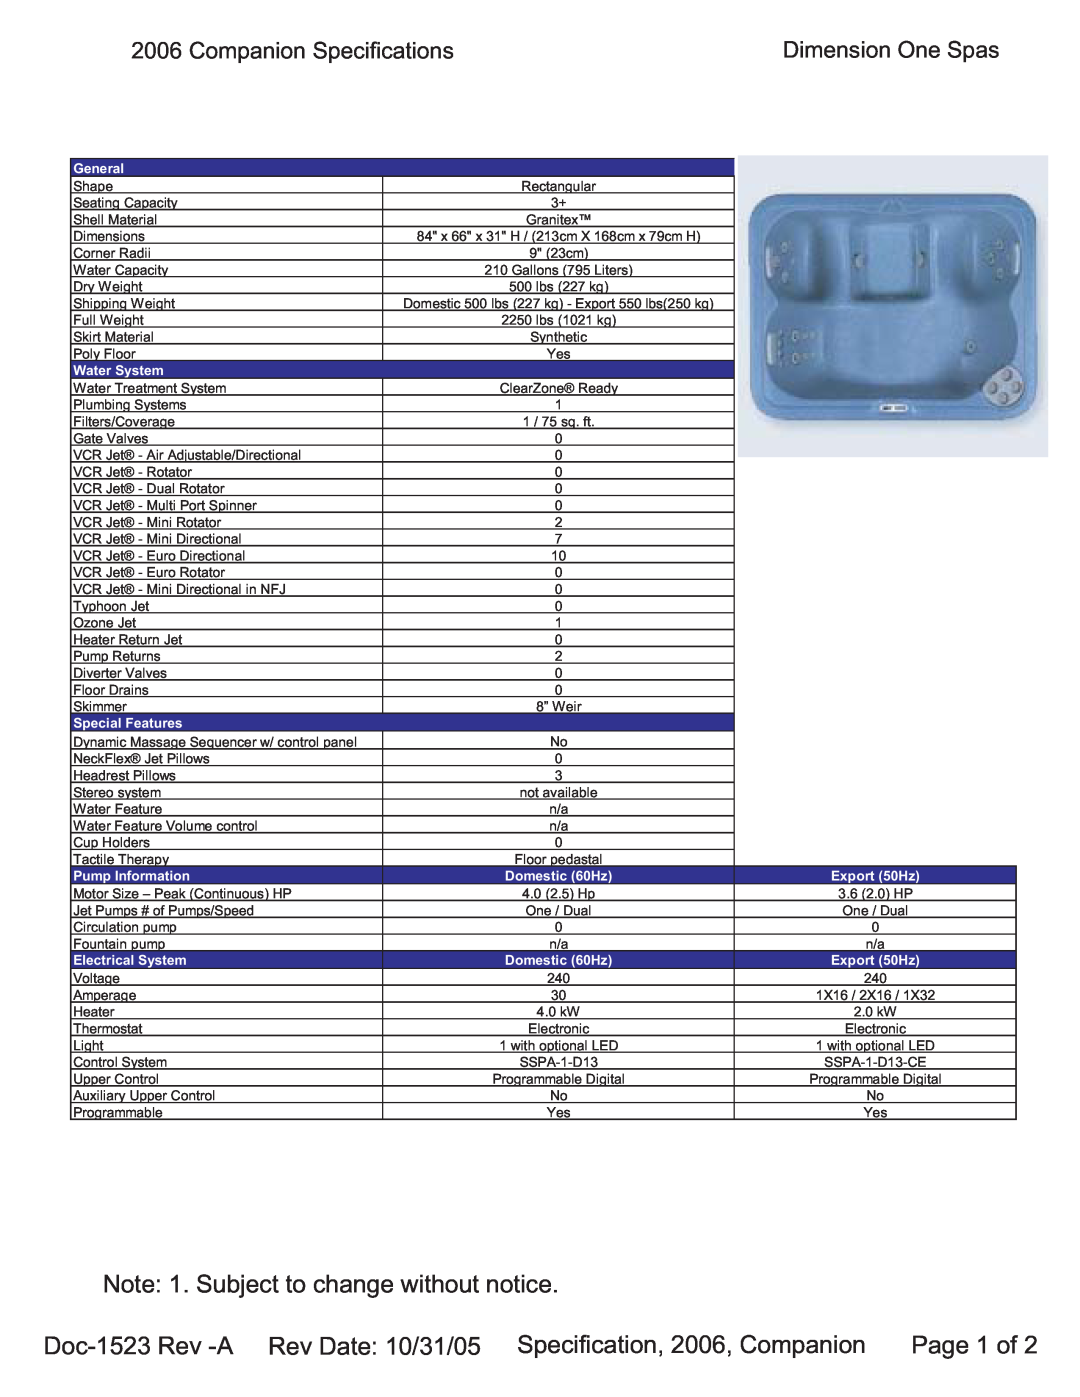 Dimension One Spas Companion specifications Note 1. Subject to change without notice, Page 1 of, General, Water System 